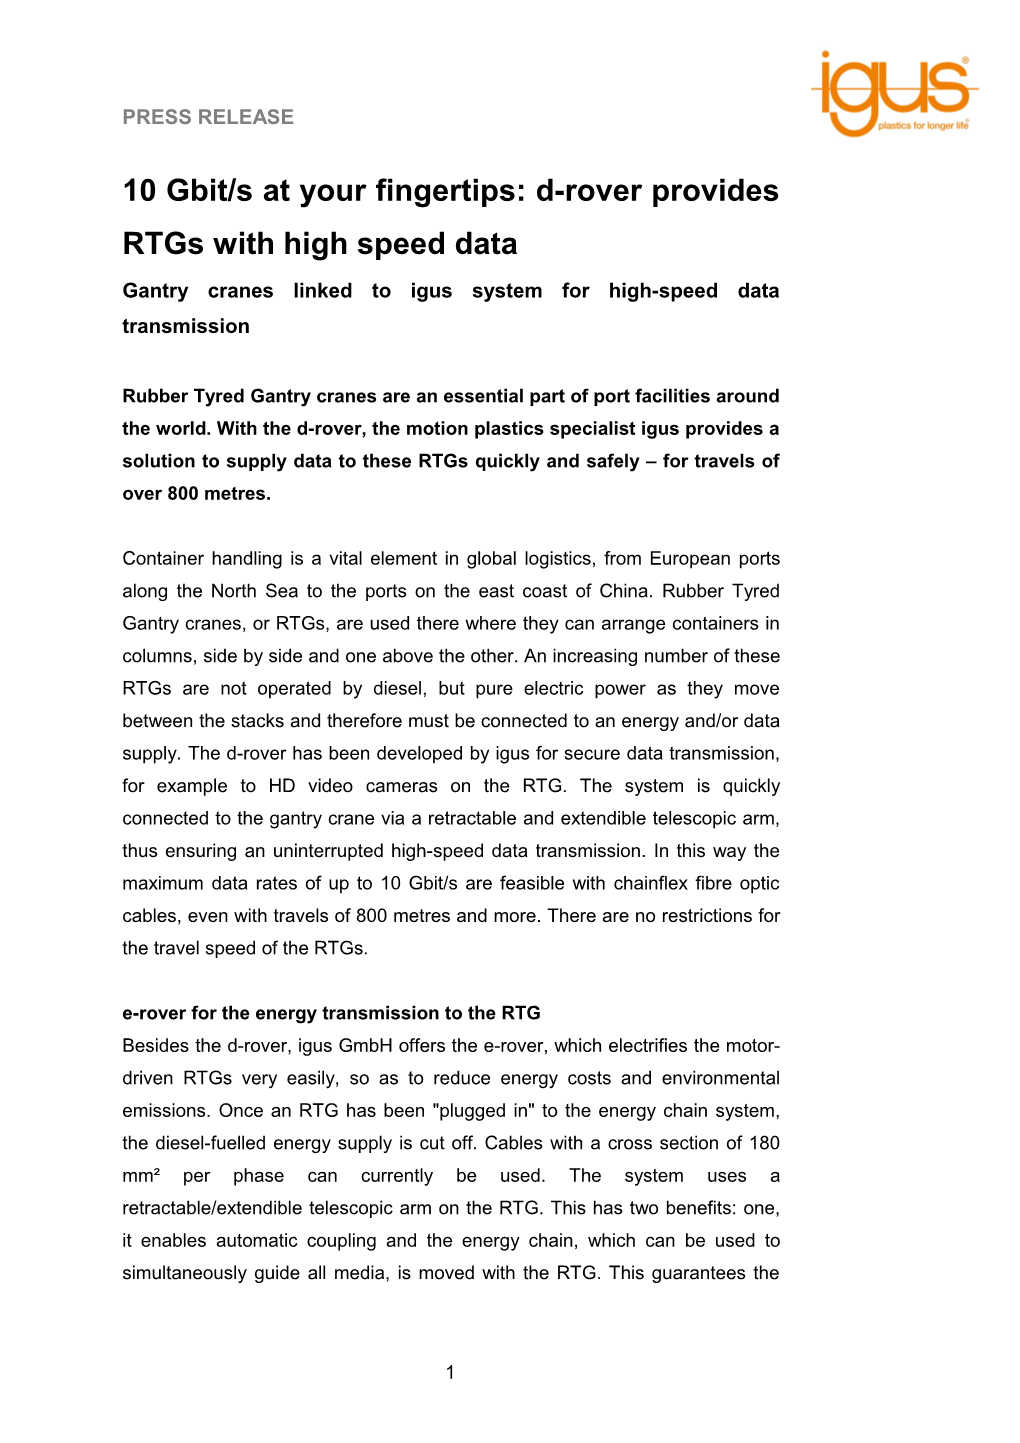 10 Gbit/S at Your Fingertips: D-Rover Provides Rtgs with High Speed Data